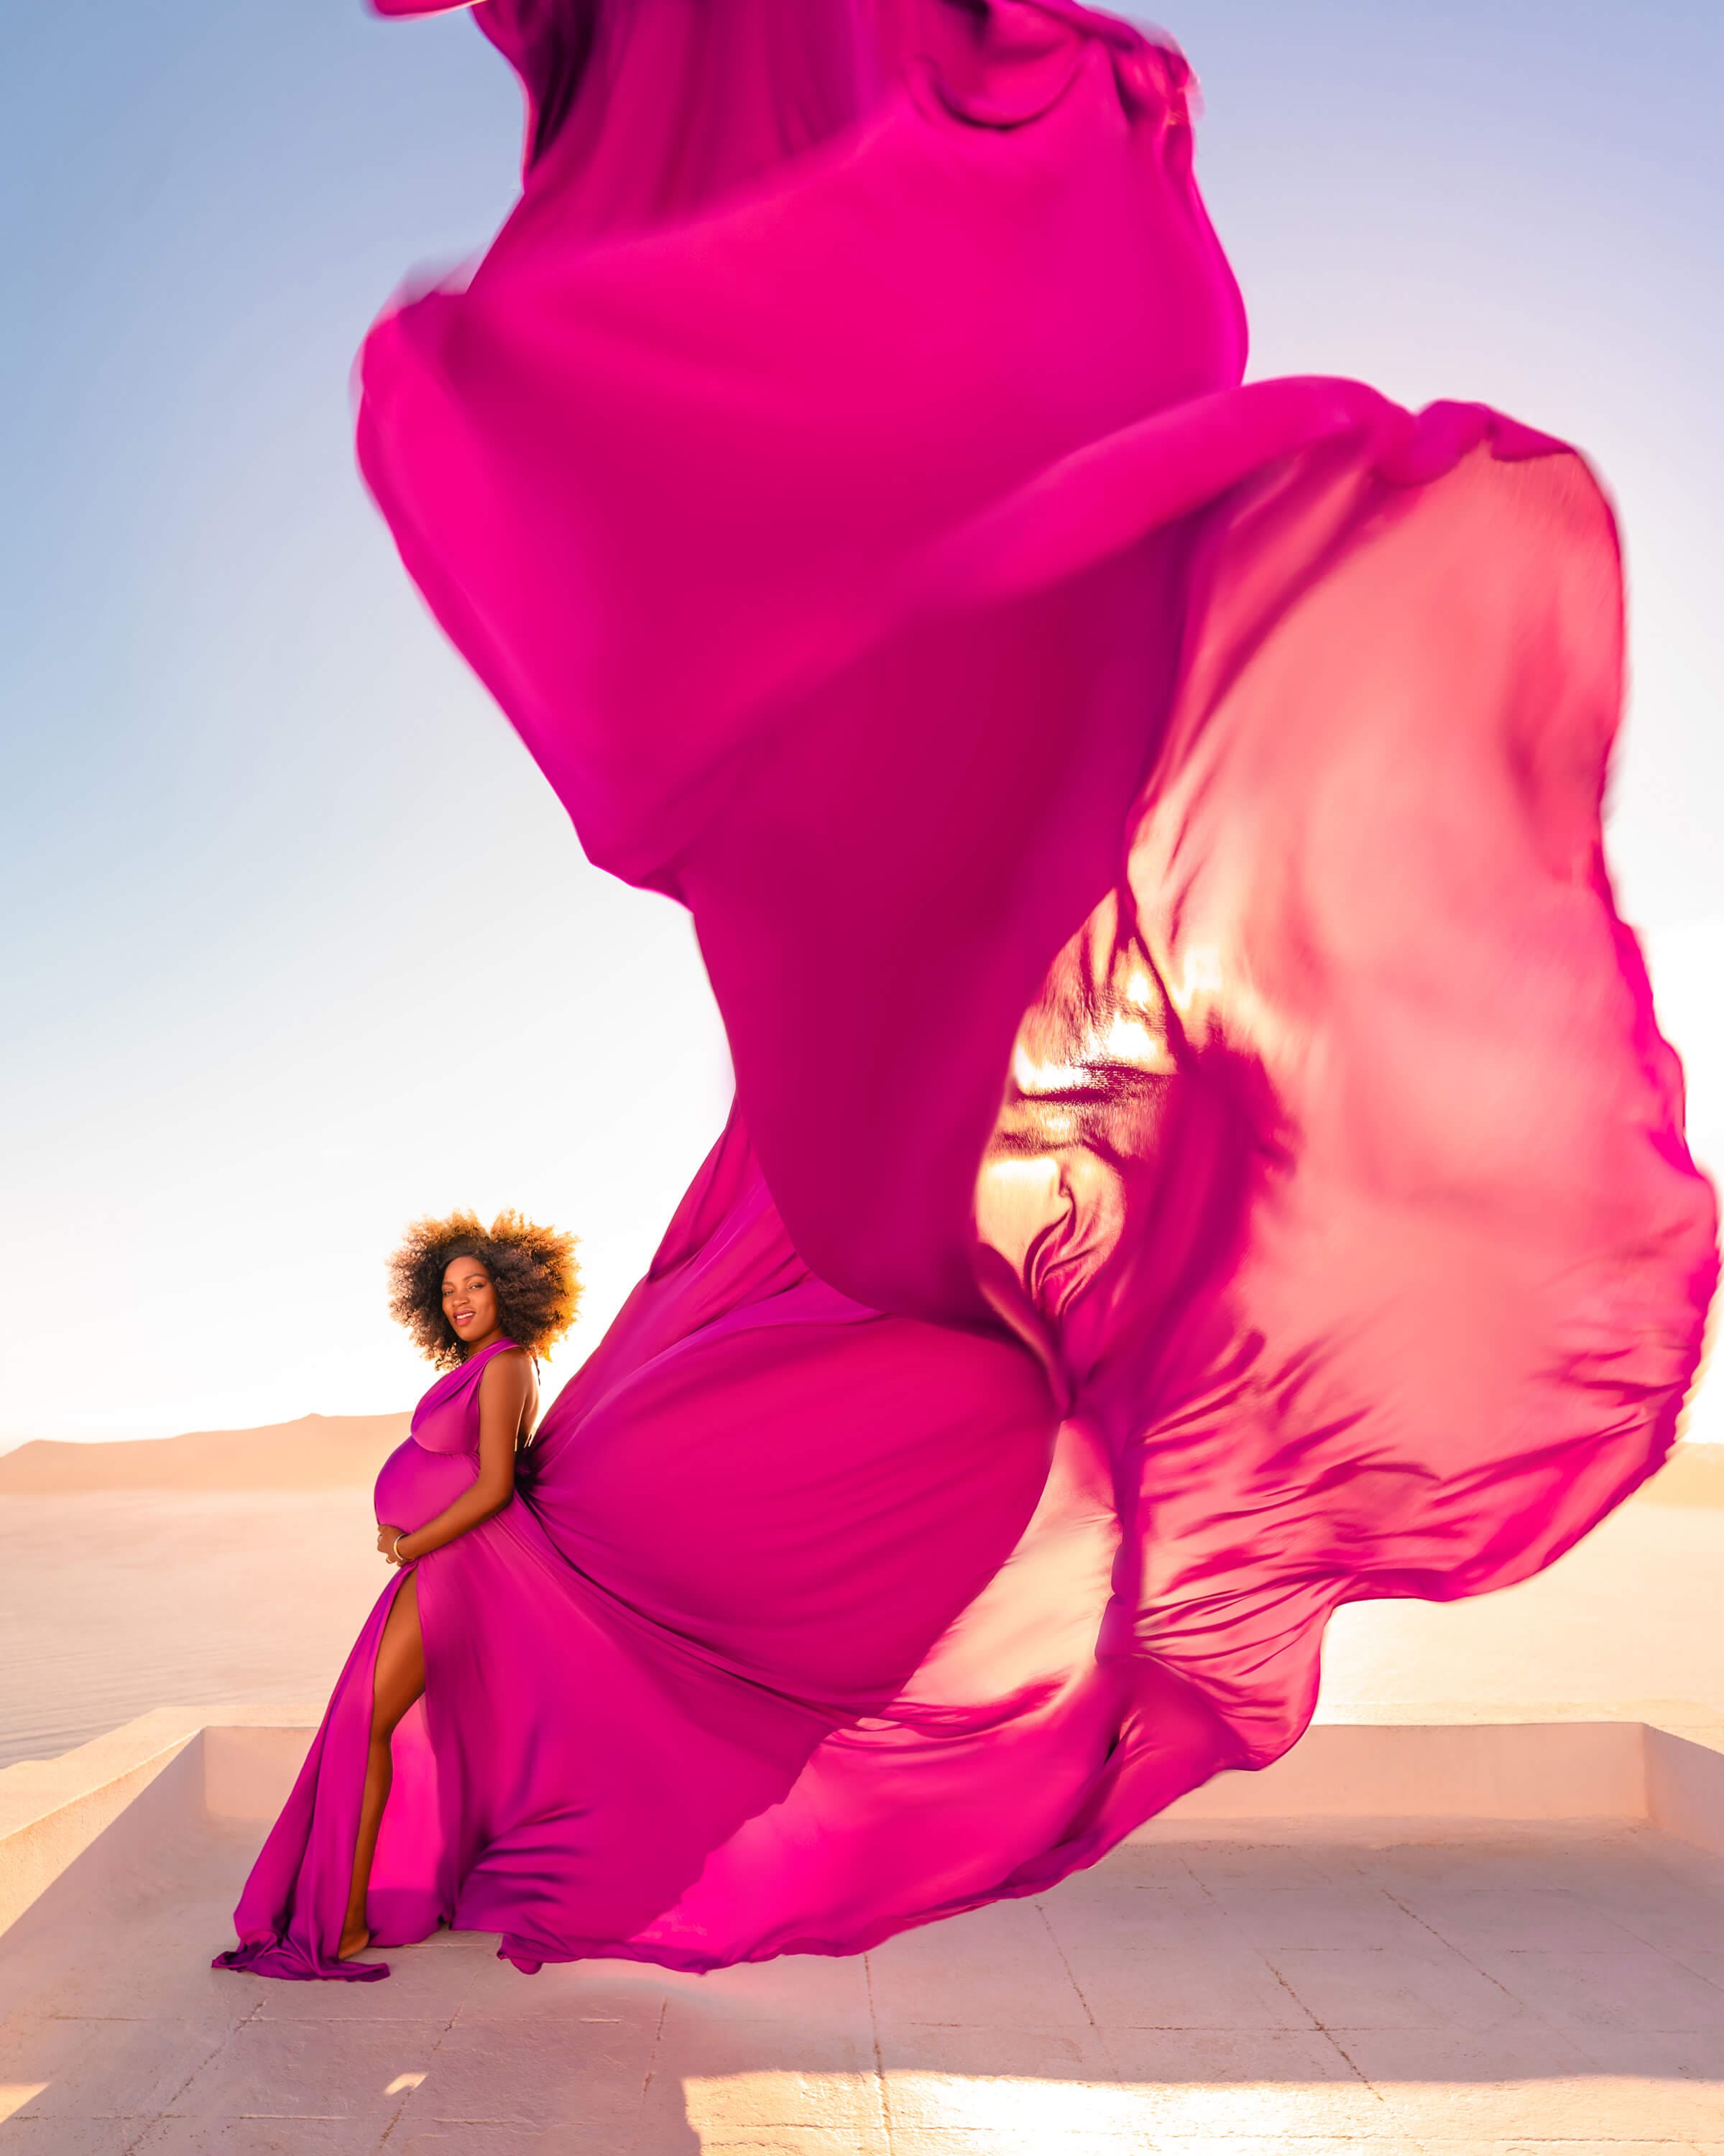 Flying Dress Photoshoot by Photographers in Santorini